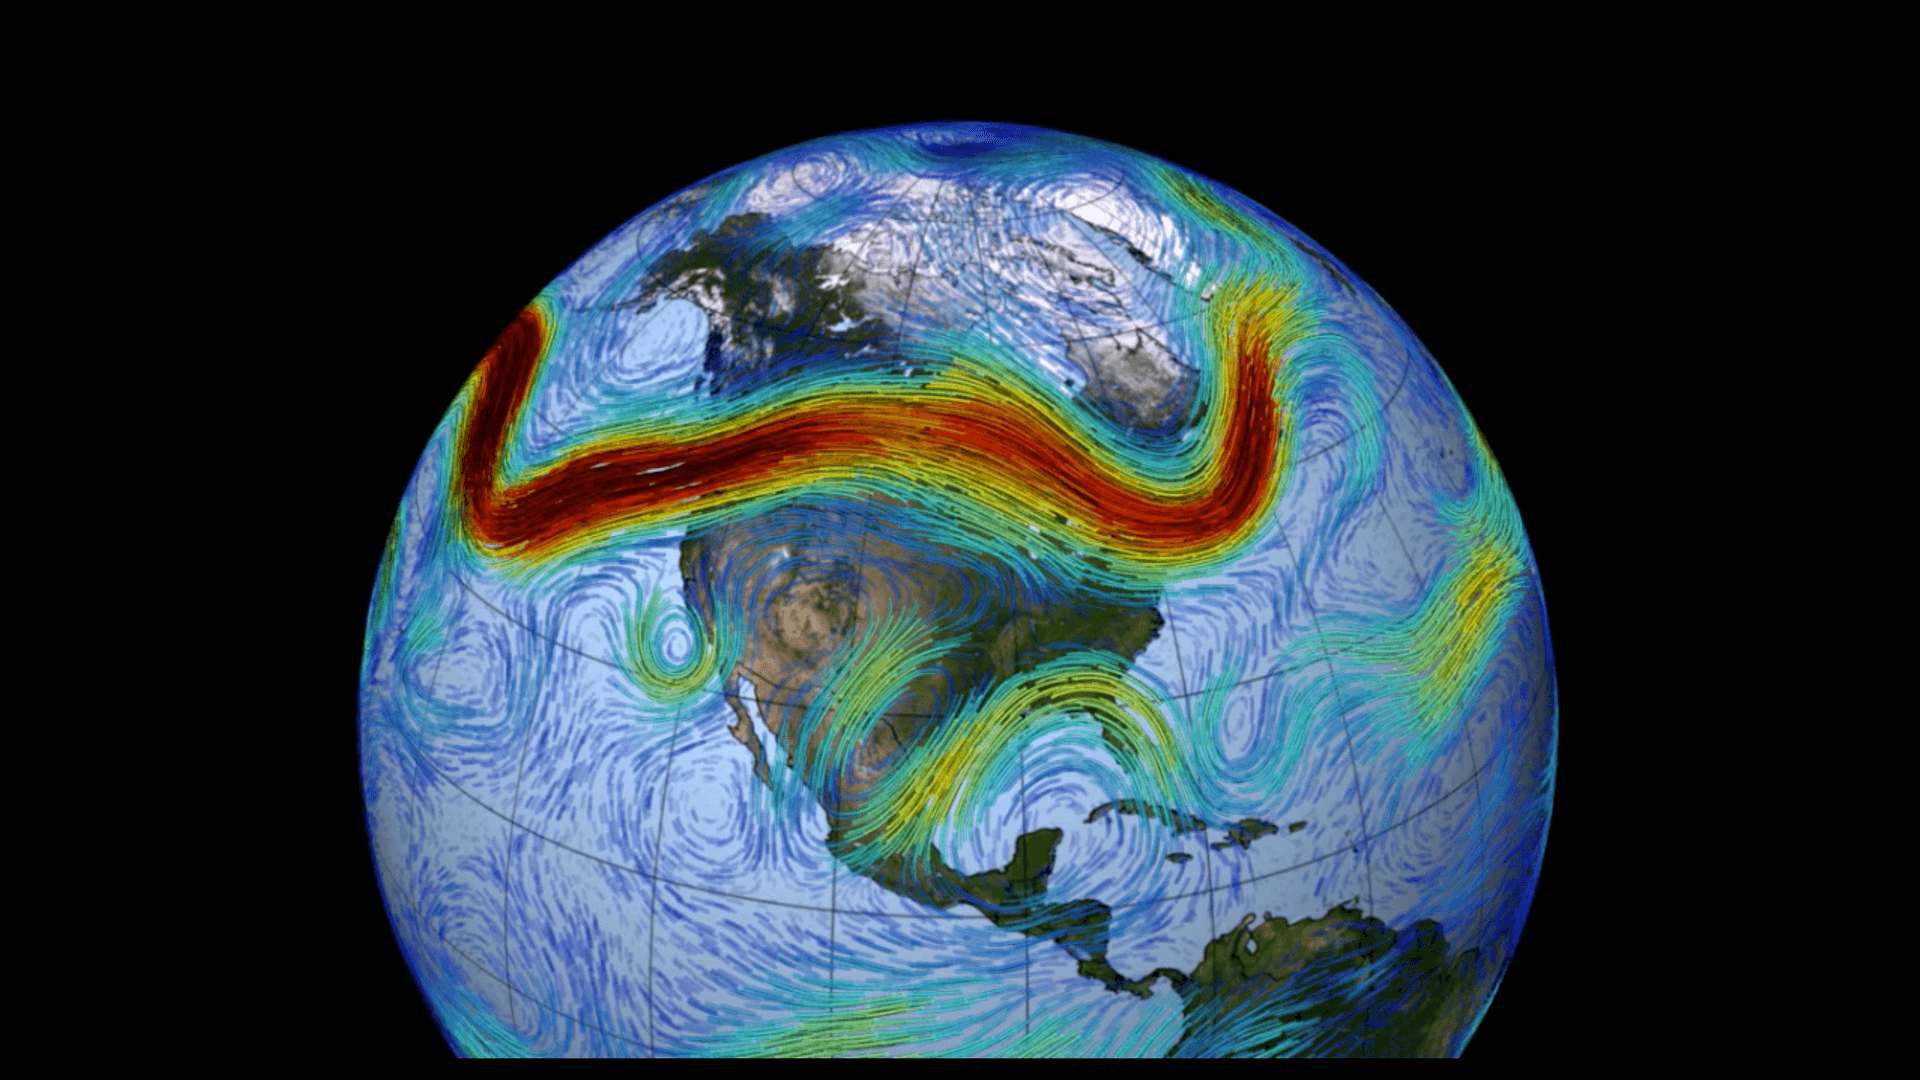 The Polar jet stream carries weather systems around the northern hemisphere. It's powered by the temperature differential between the Arctic and areas farther south, but new research finds that it's being disrupted as rapid warming in the Arctic reduces t